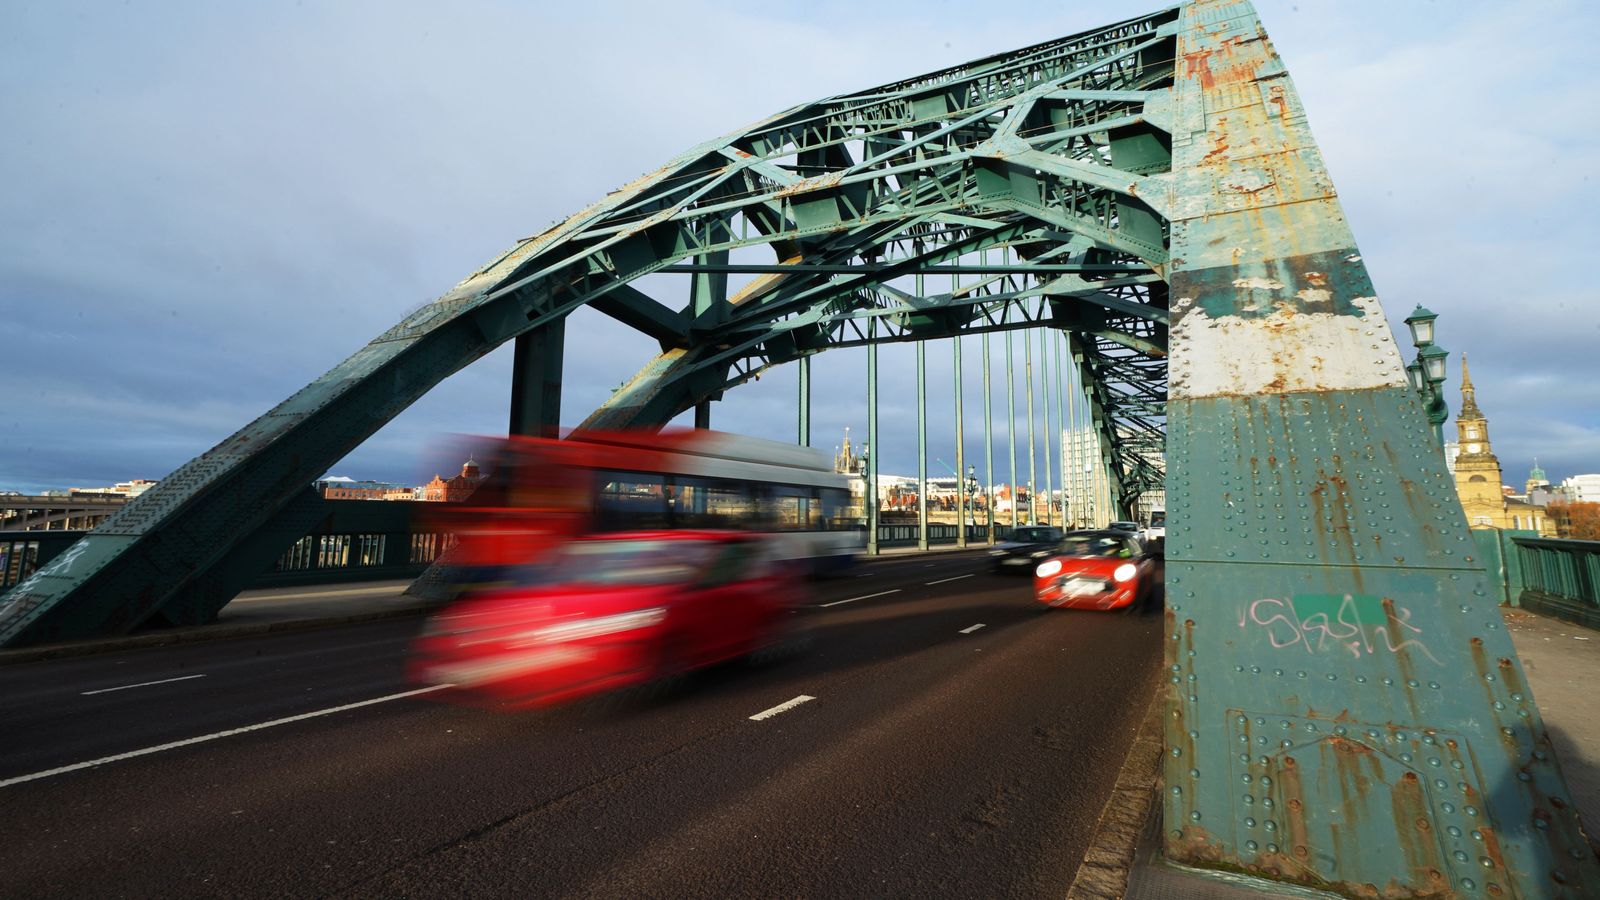 North of England sees lowest investment of advanced economies, think tank finds